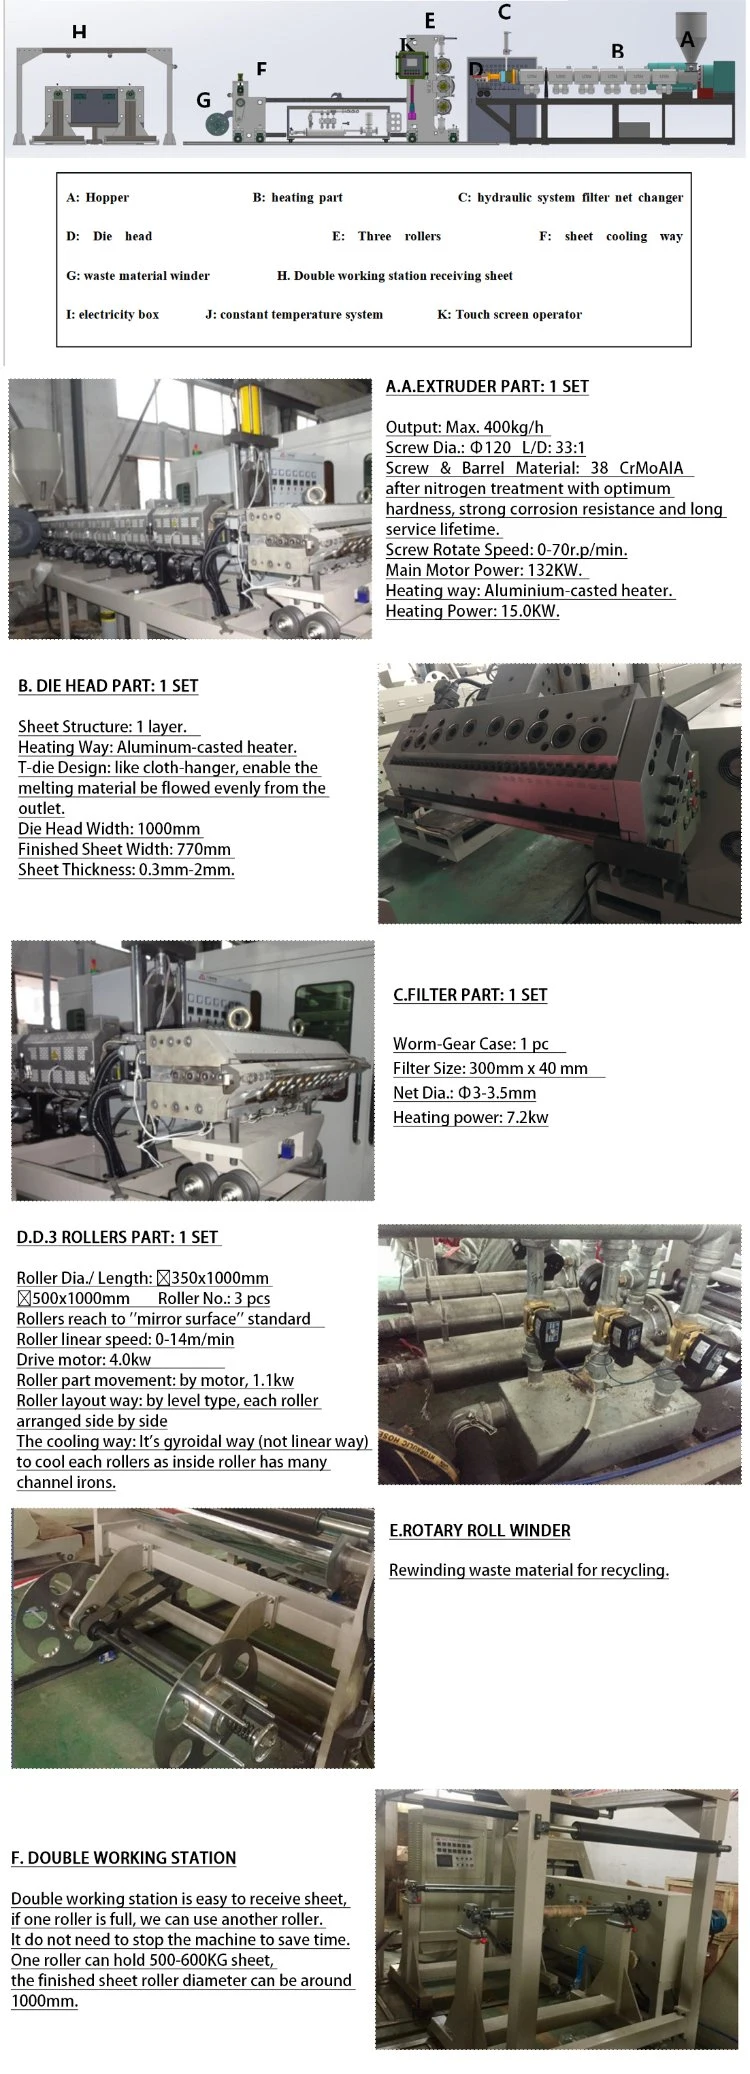 Small PLA Pet PS PP Sheet Extruder Extrusion Extruding Making Machine Price